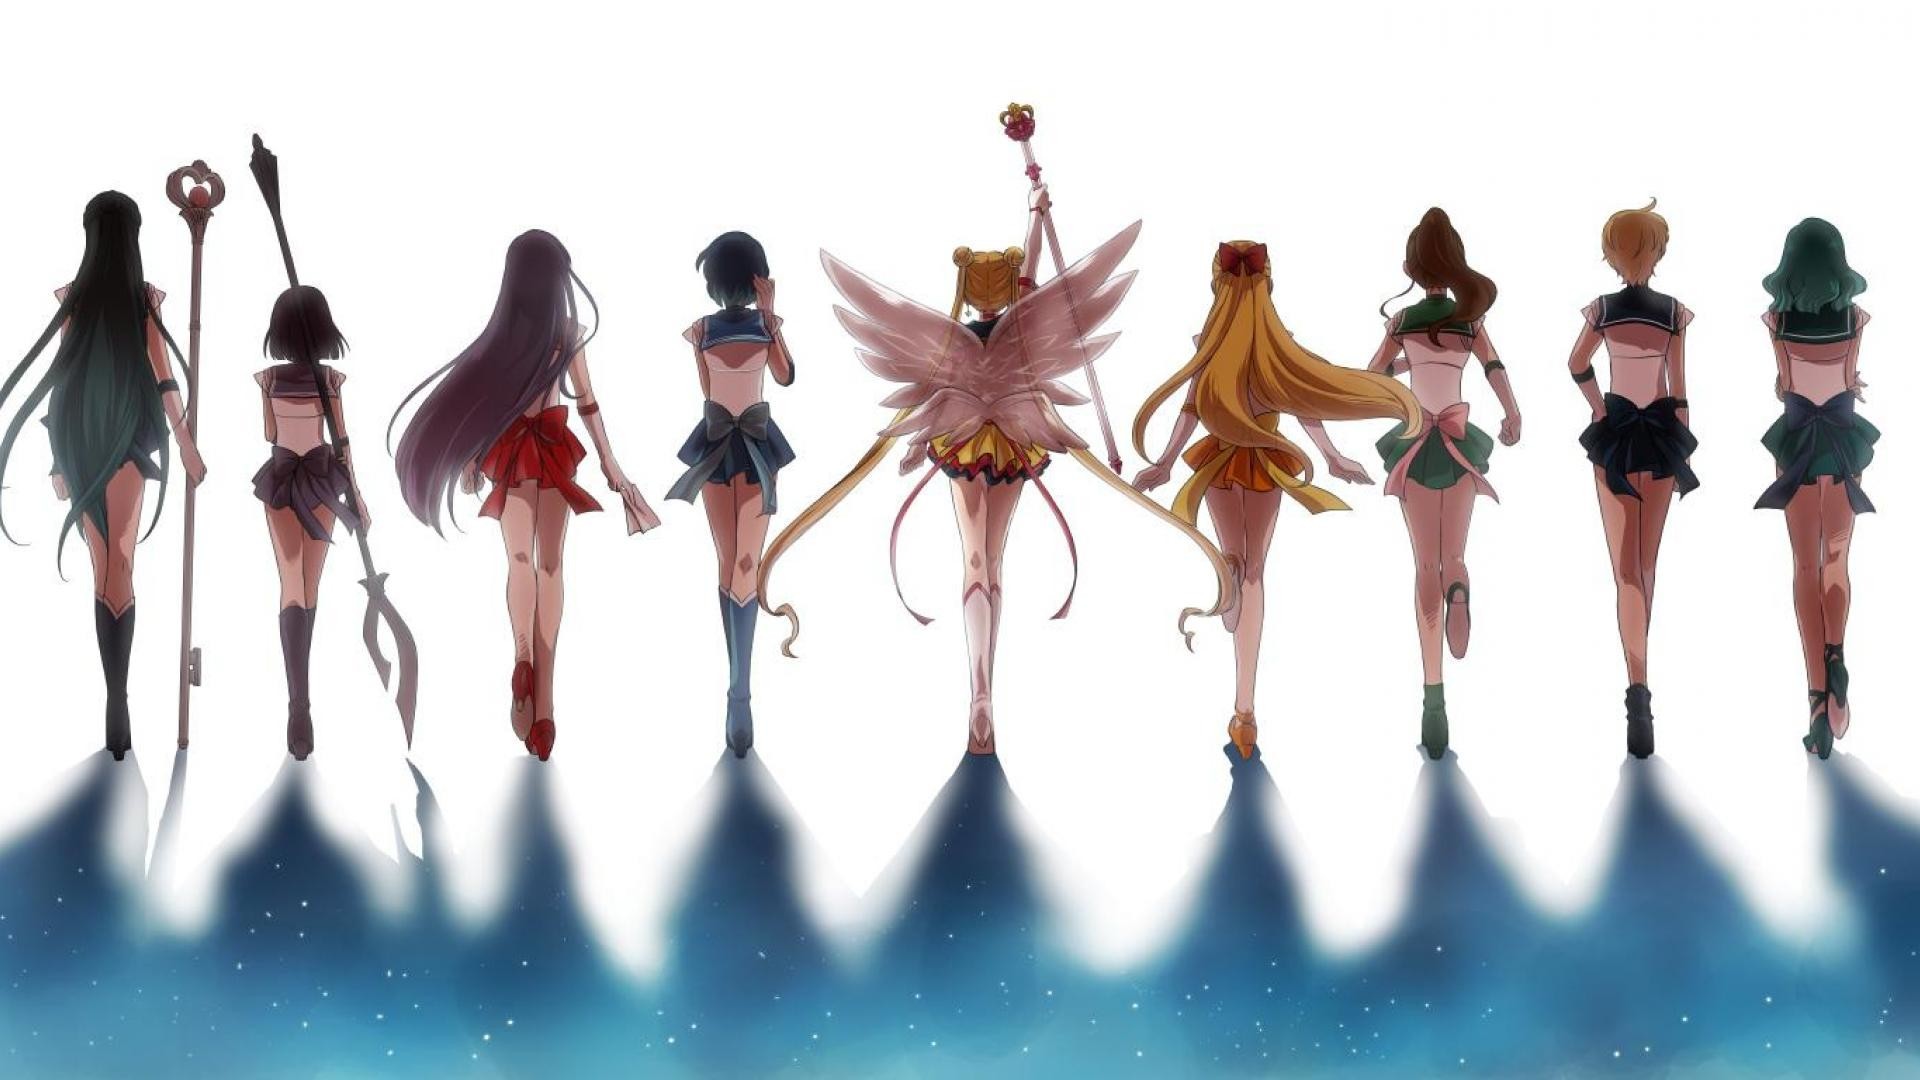 1920x1080  Sailor Moon HD Wallpapers and Backgrounds 1024Ã—768 Sailor Moon  Wallpaper (39 Wallpapers) | Adorable Wallpapers | Desktop | Pinterest |  Sailor ...